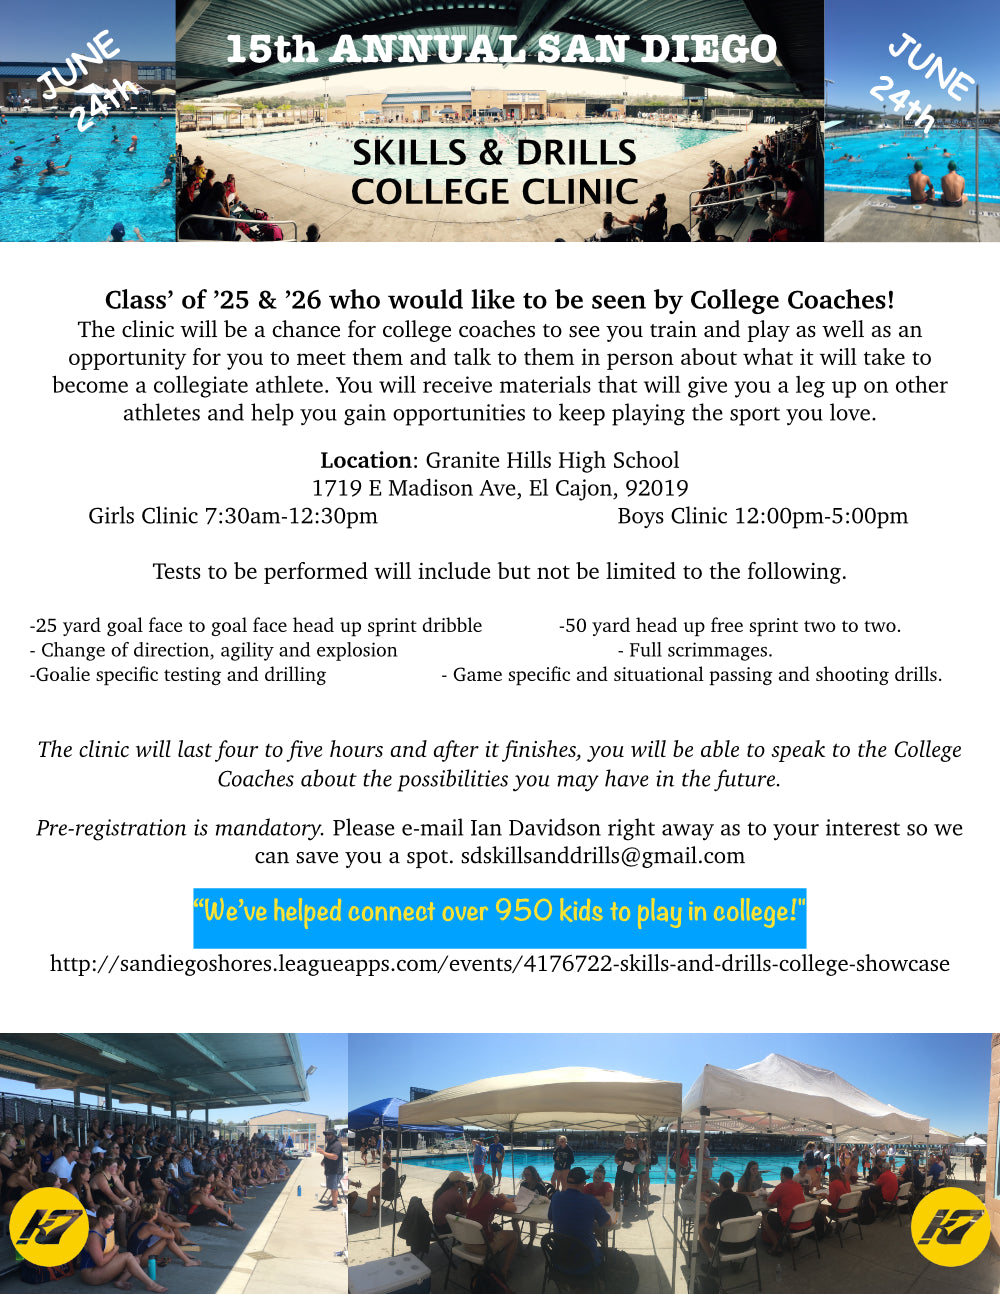 Skills and Drills College Clinic